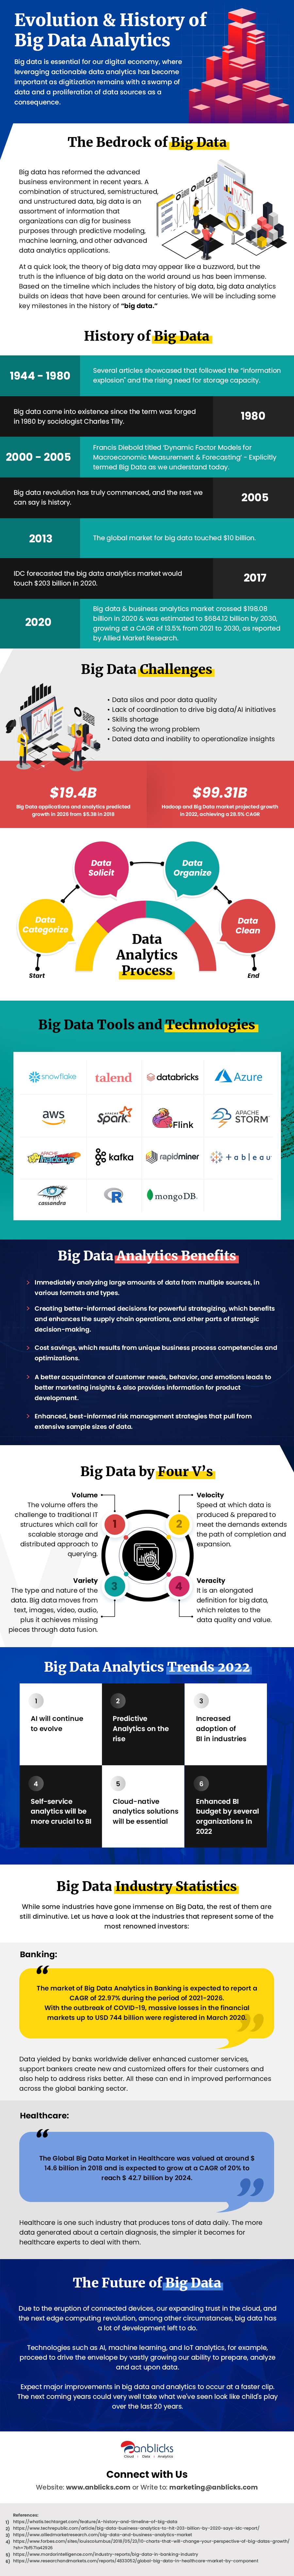 History of Big Data Analytics, Enterprise Tools and Technologies, Challenges and Benefits as well as Trends that will define the future